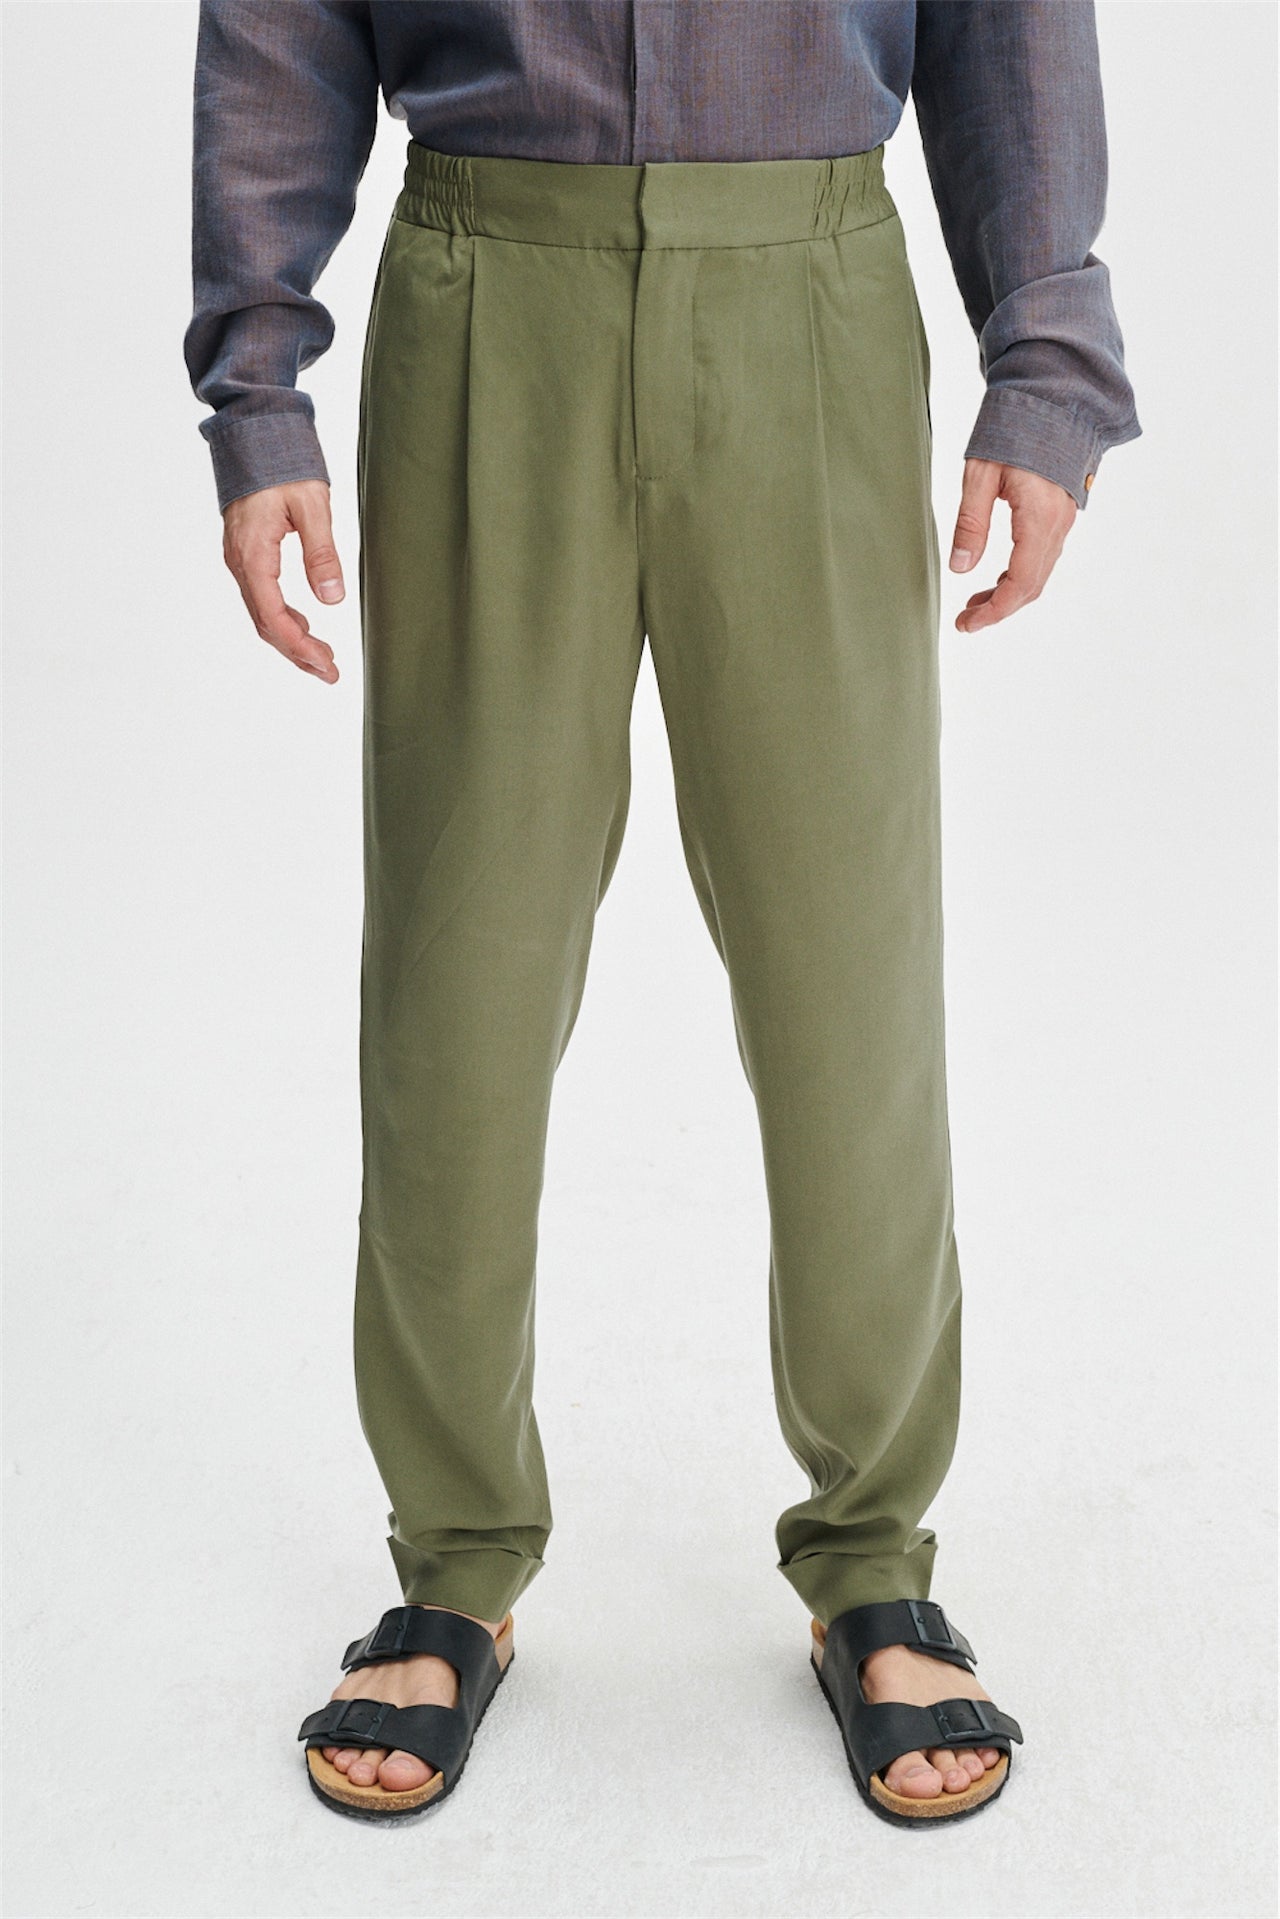 Garden Trousers in an Olive Green Sustainable Smooth and Soft Italian Lyocell Gabardine